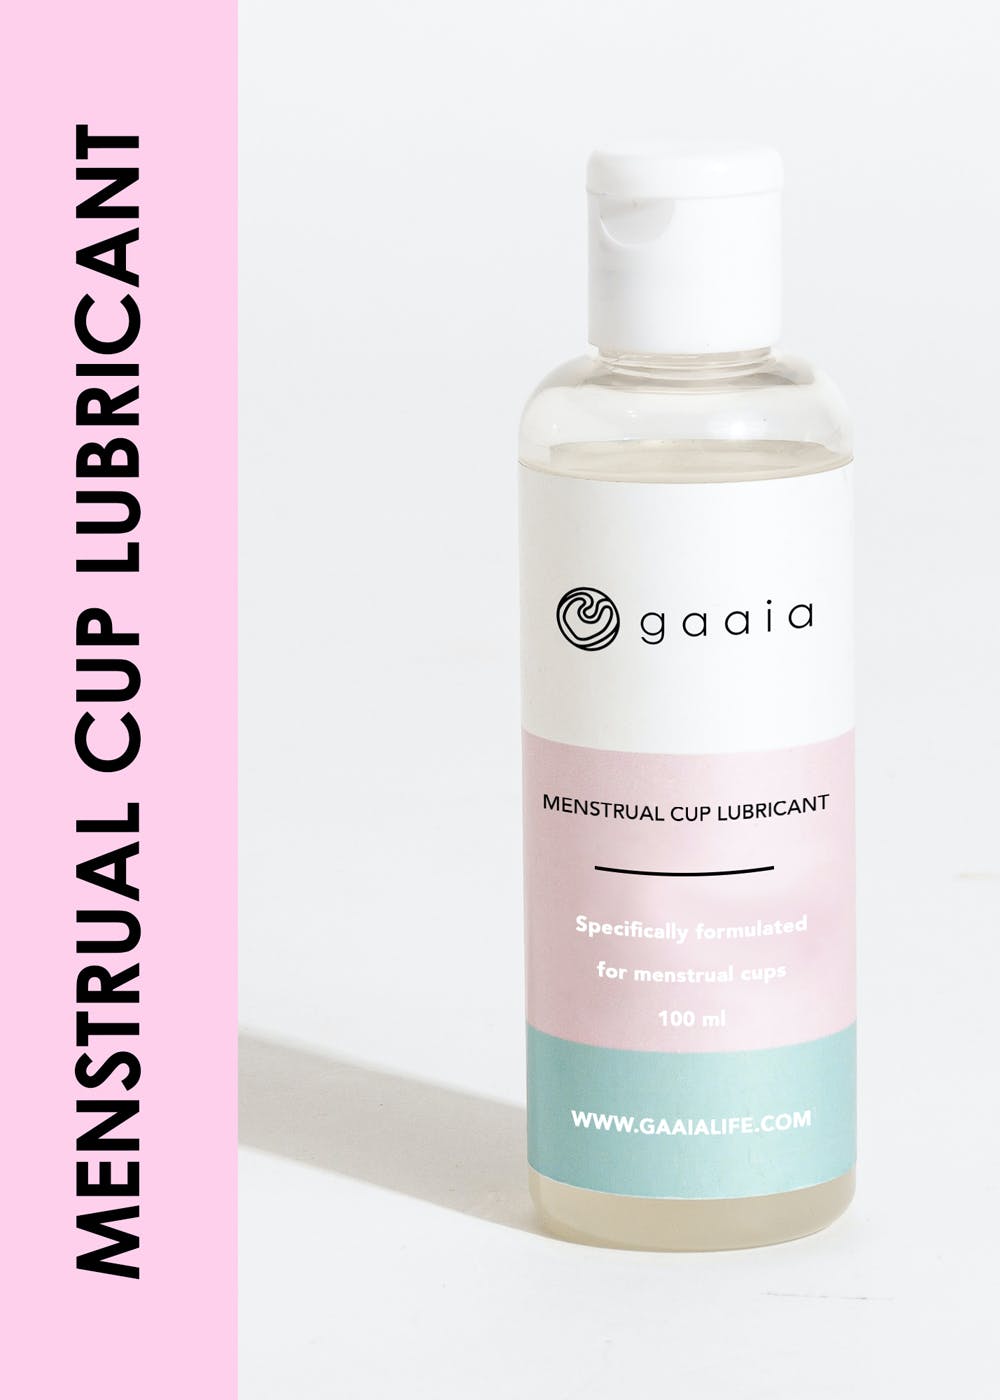 Menstrual Cup Lubricant